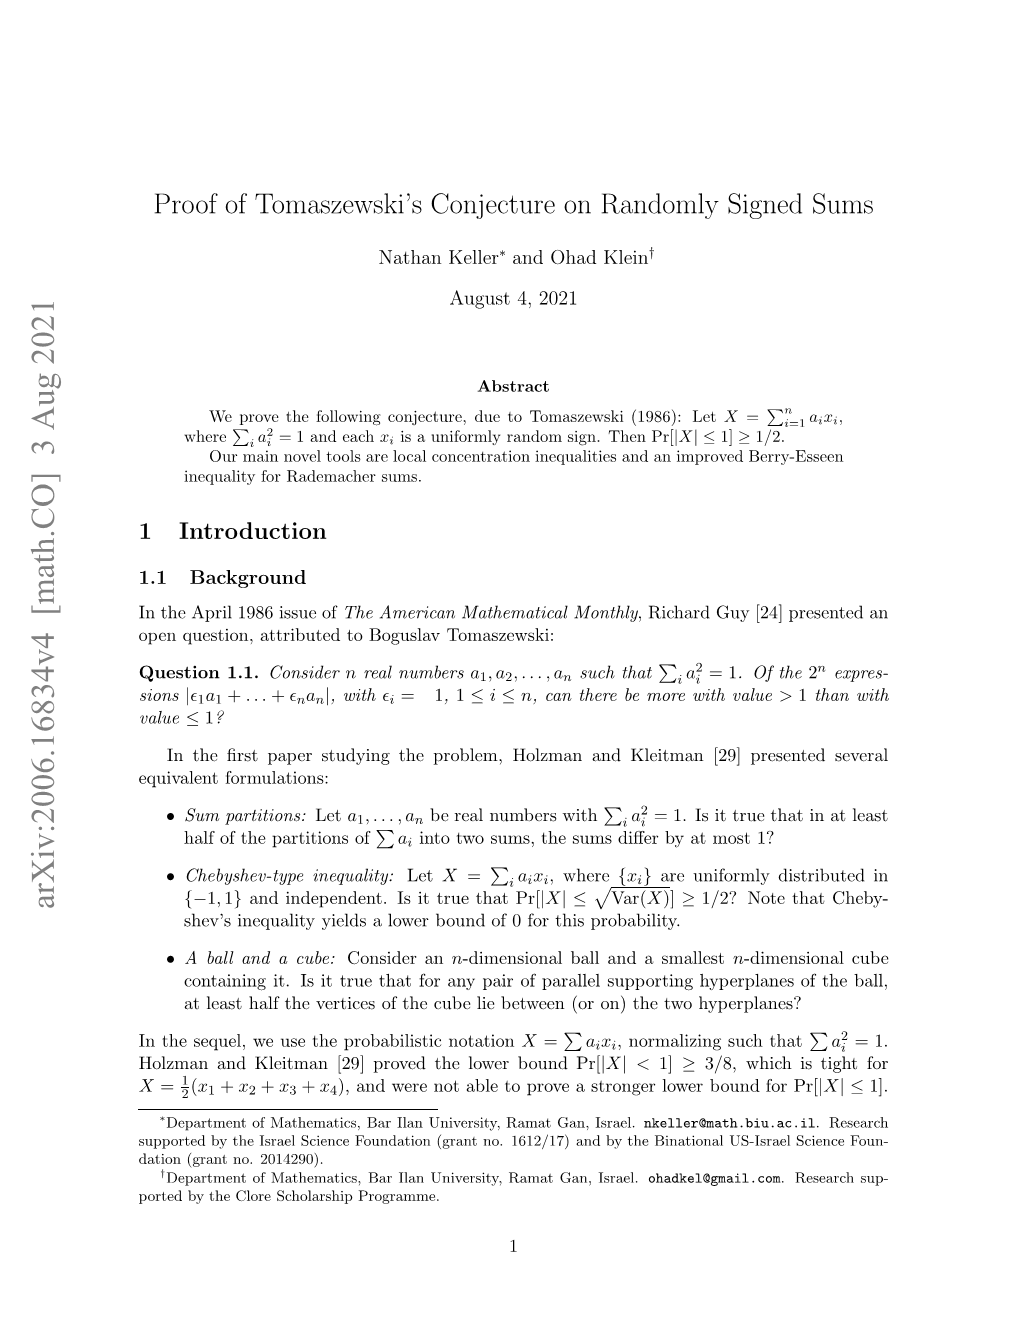 Proof of Tomaszewski's Conjecture on Randomly Signed Sums